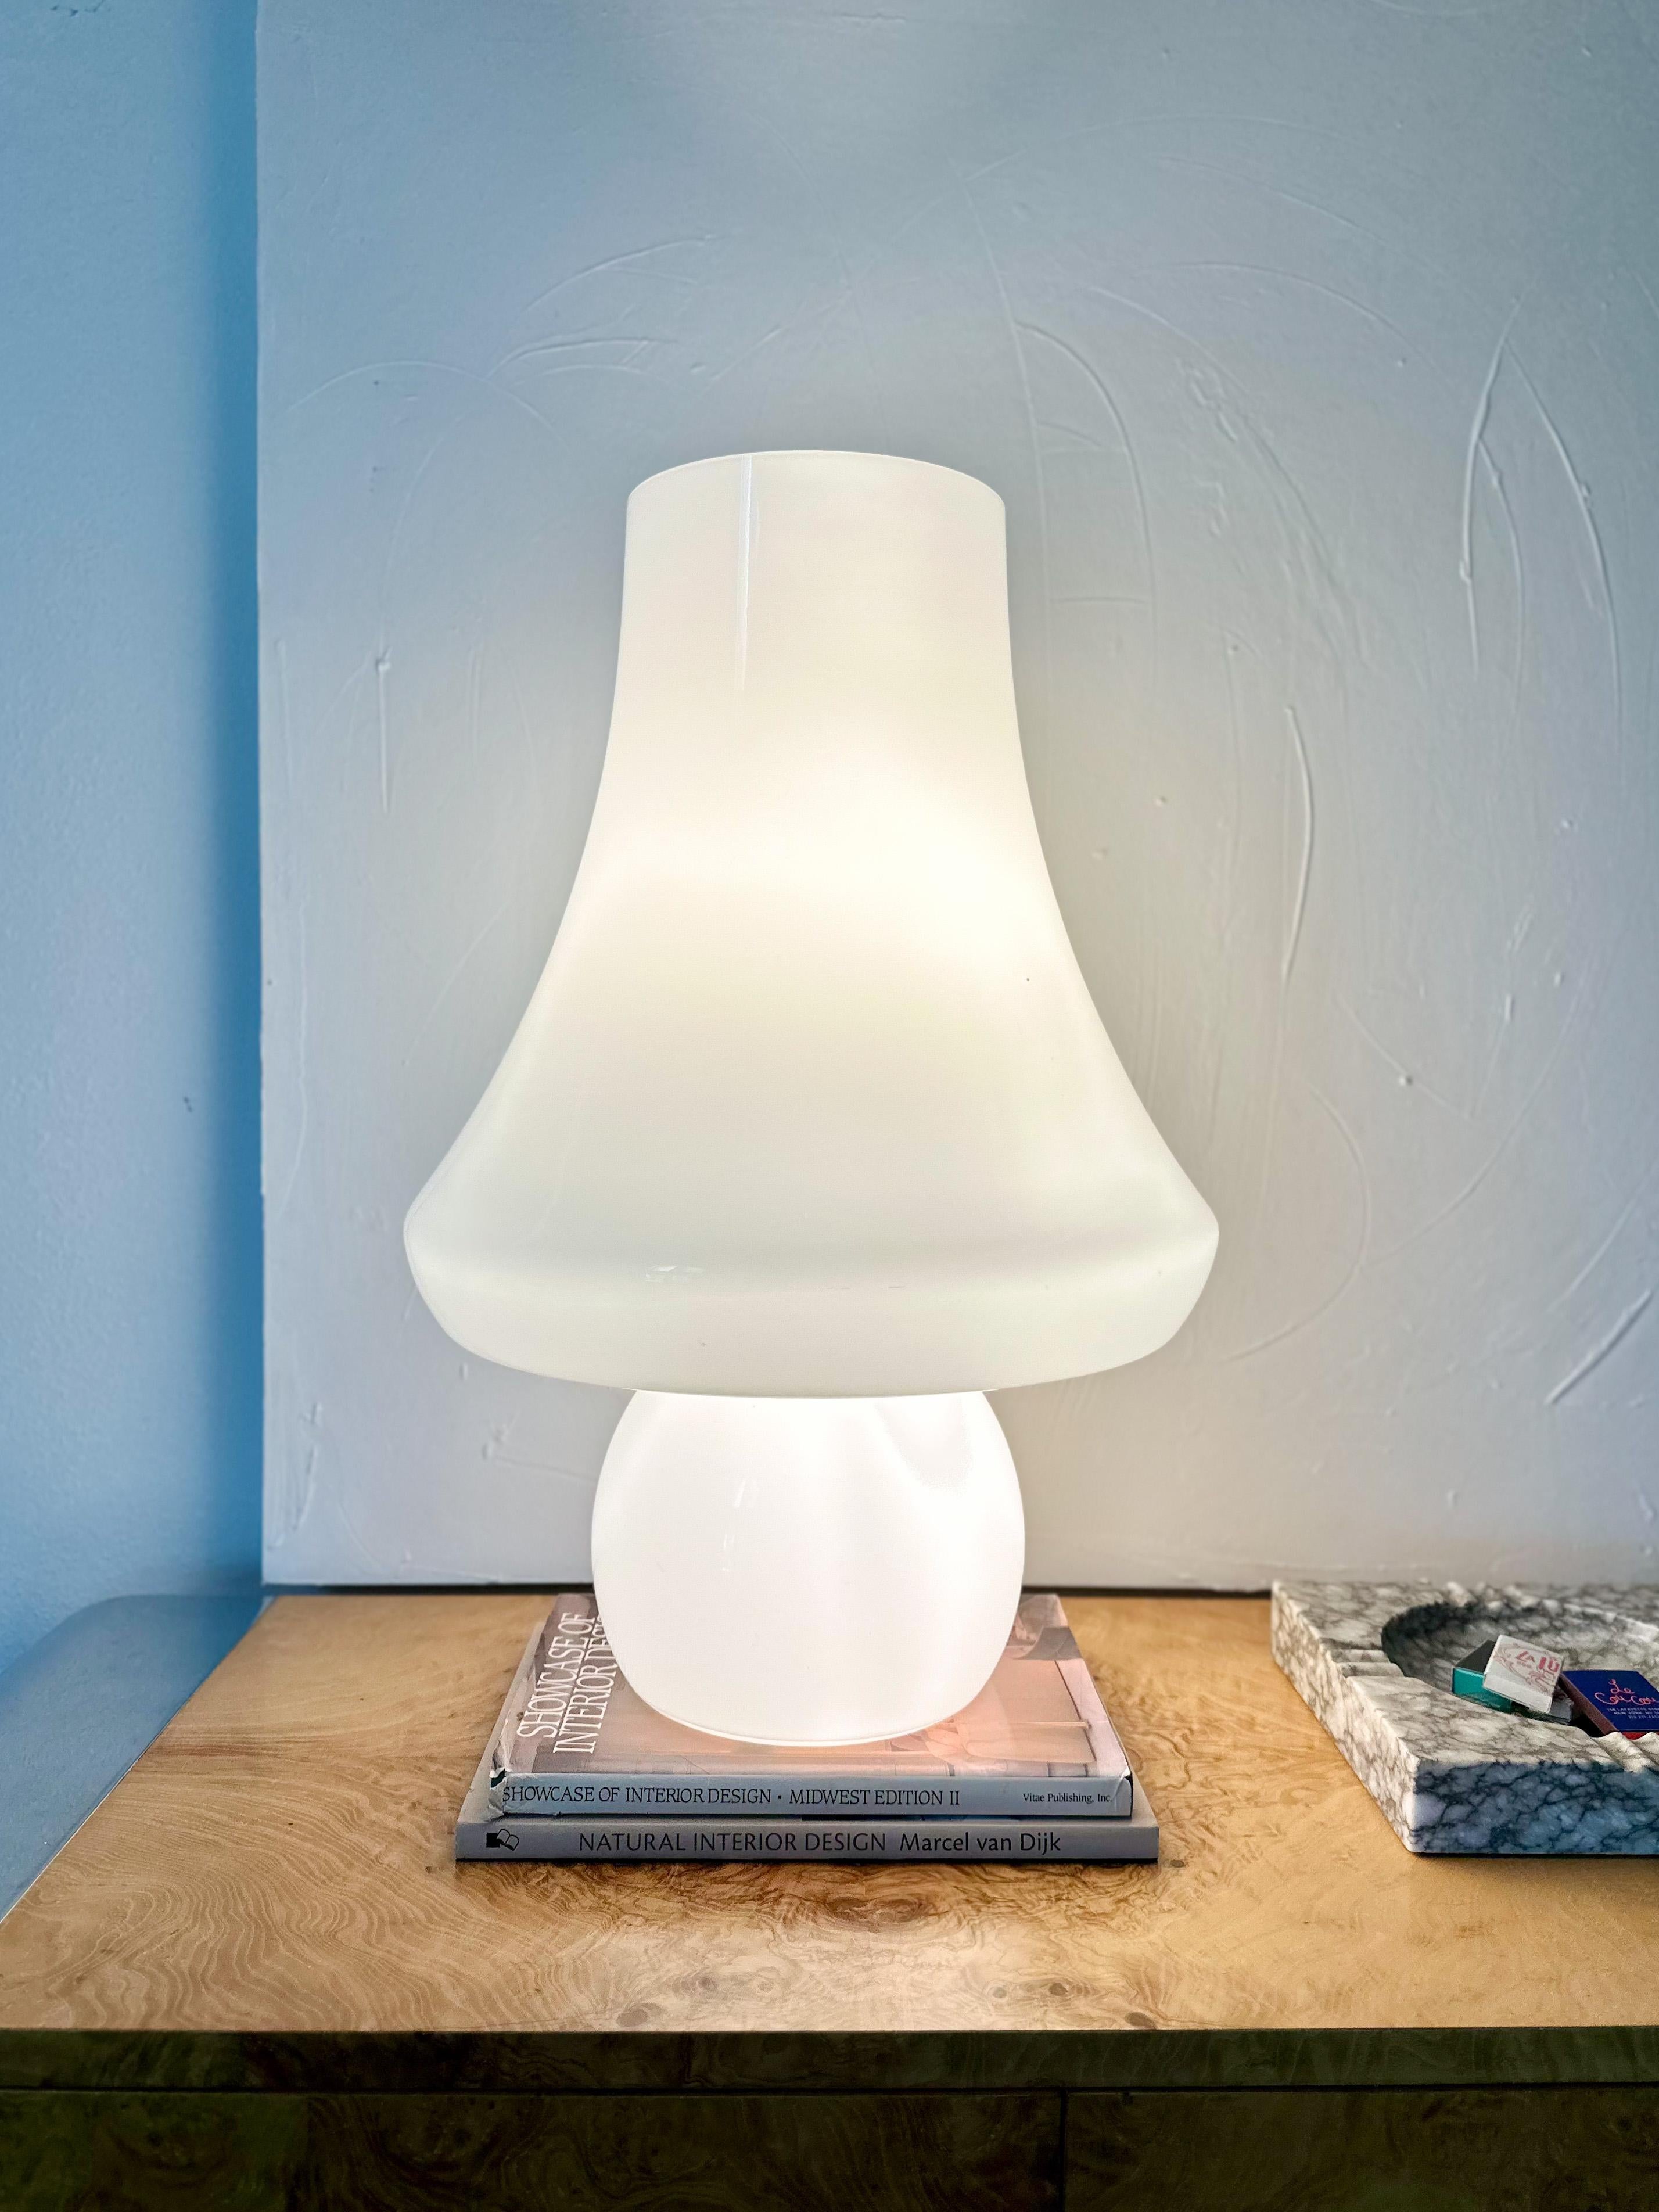 Monumental milky-white Murano glass mushroom lamp, hand-blown in Italy by Vetreria De Majo c.1960s. This piece is insanely massive--over two feet tall--an incredibly rare find. Photos alone can barely convey the scale! While the lamp alone is a work